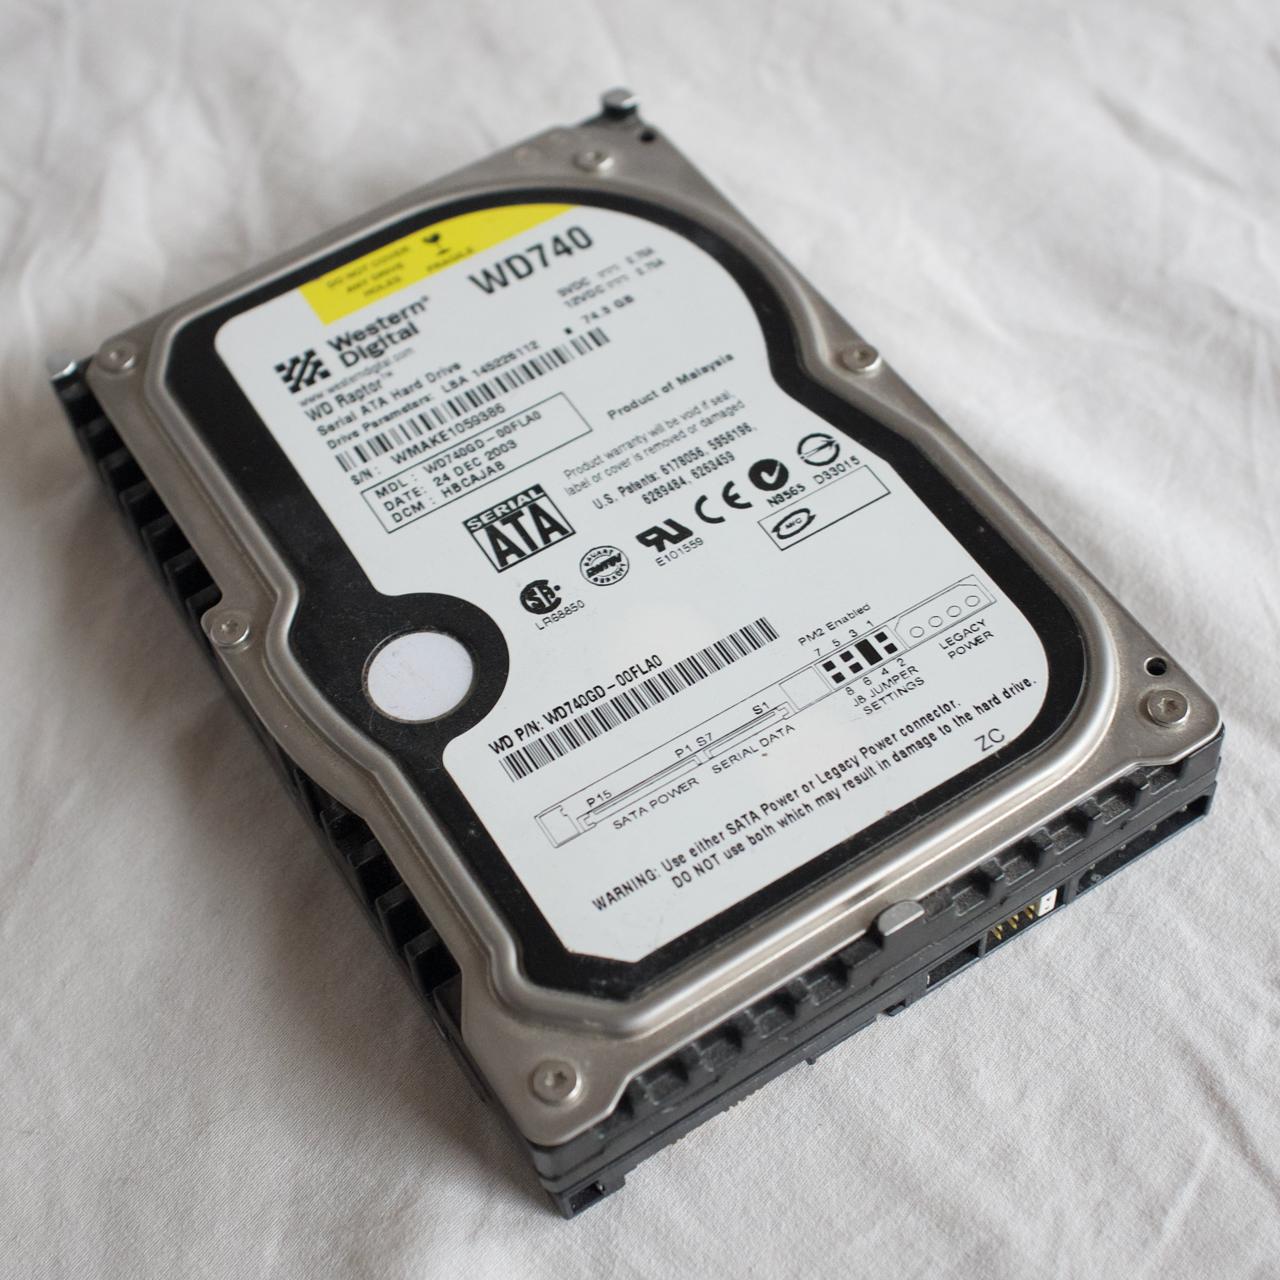 An ode to the 10,000 RPM Western Digital (Veloci)Raptor